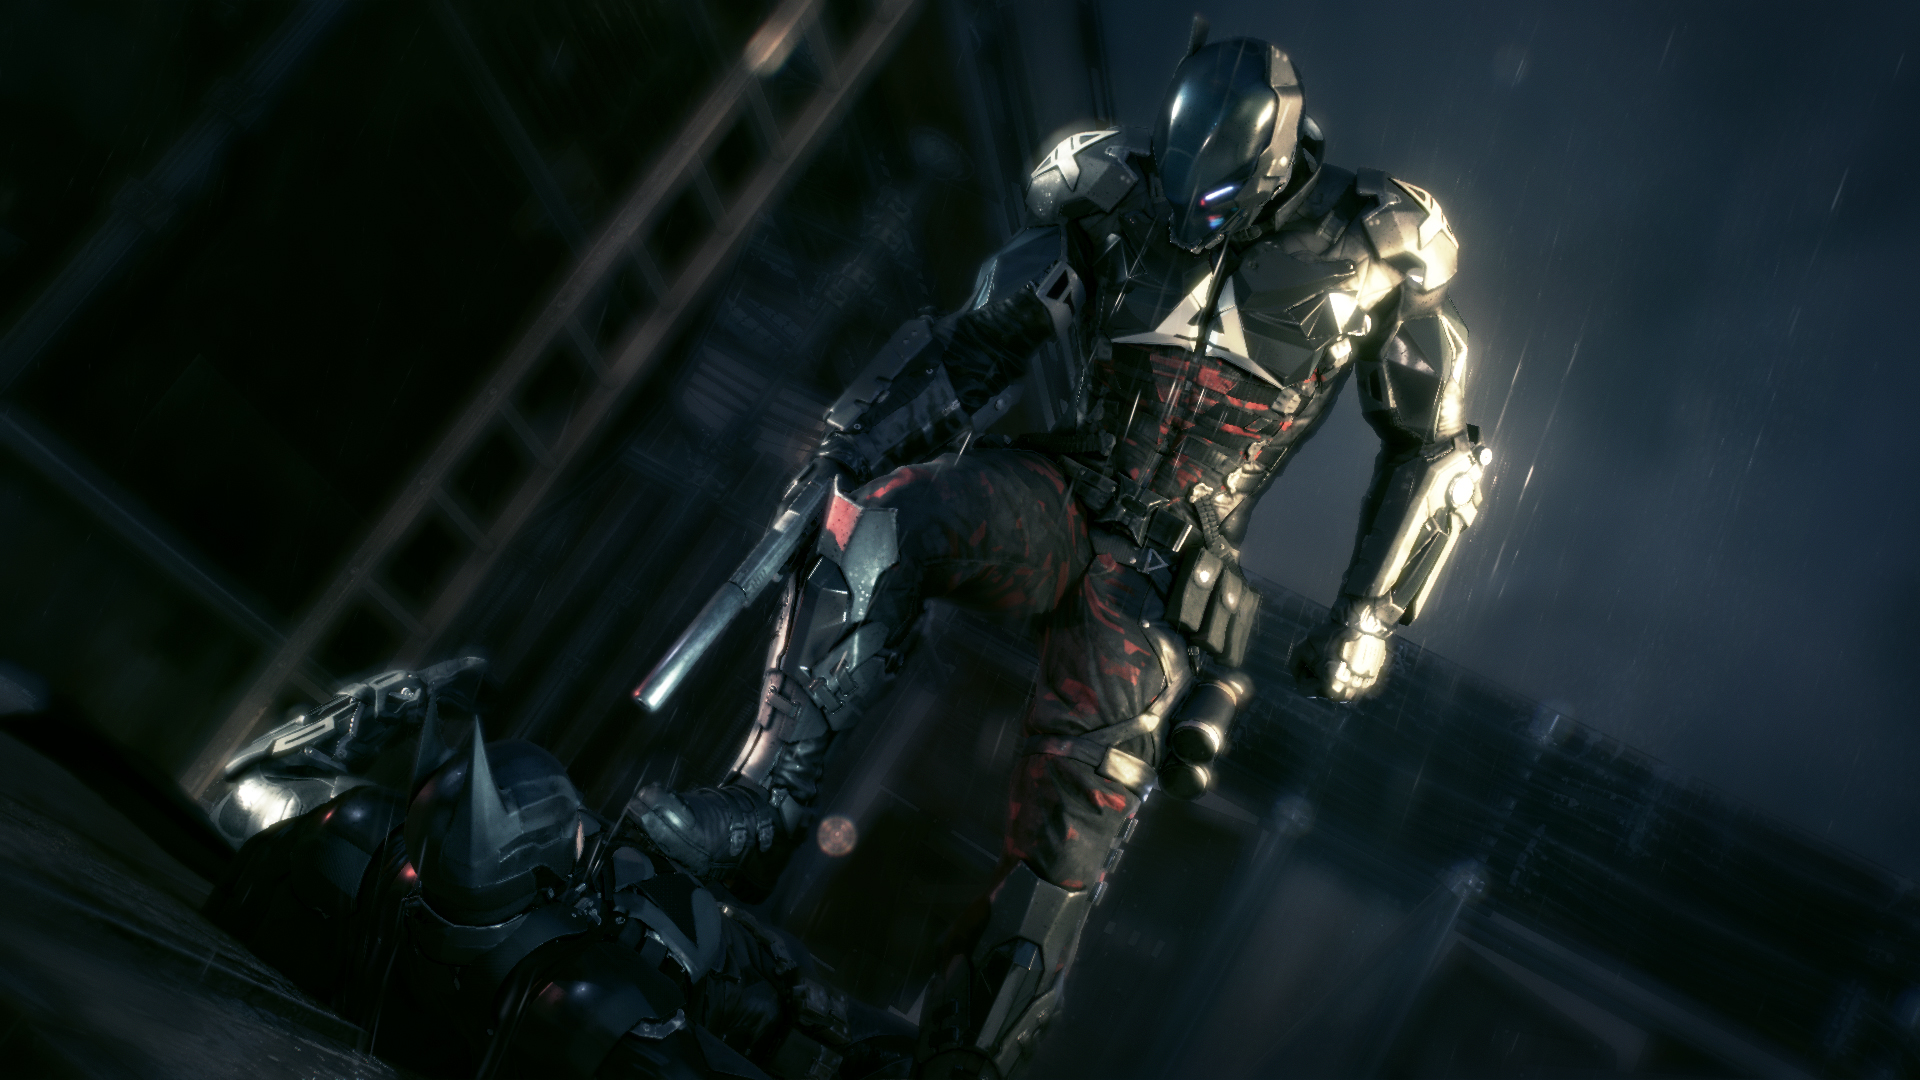 A Very Excited Man Tells Us All About Batman: Arkham Knight